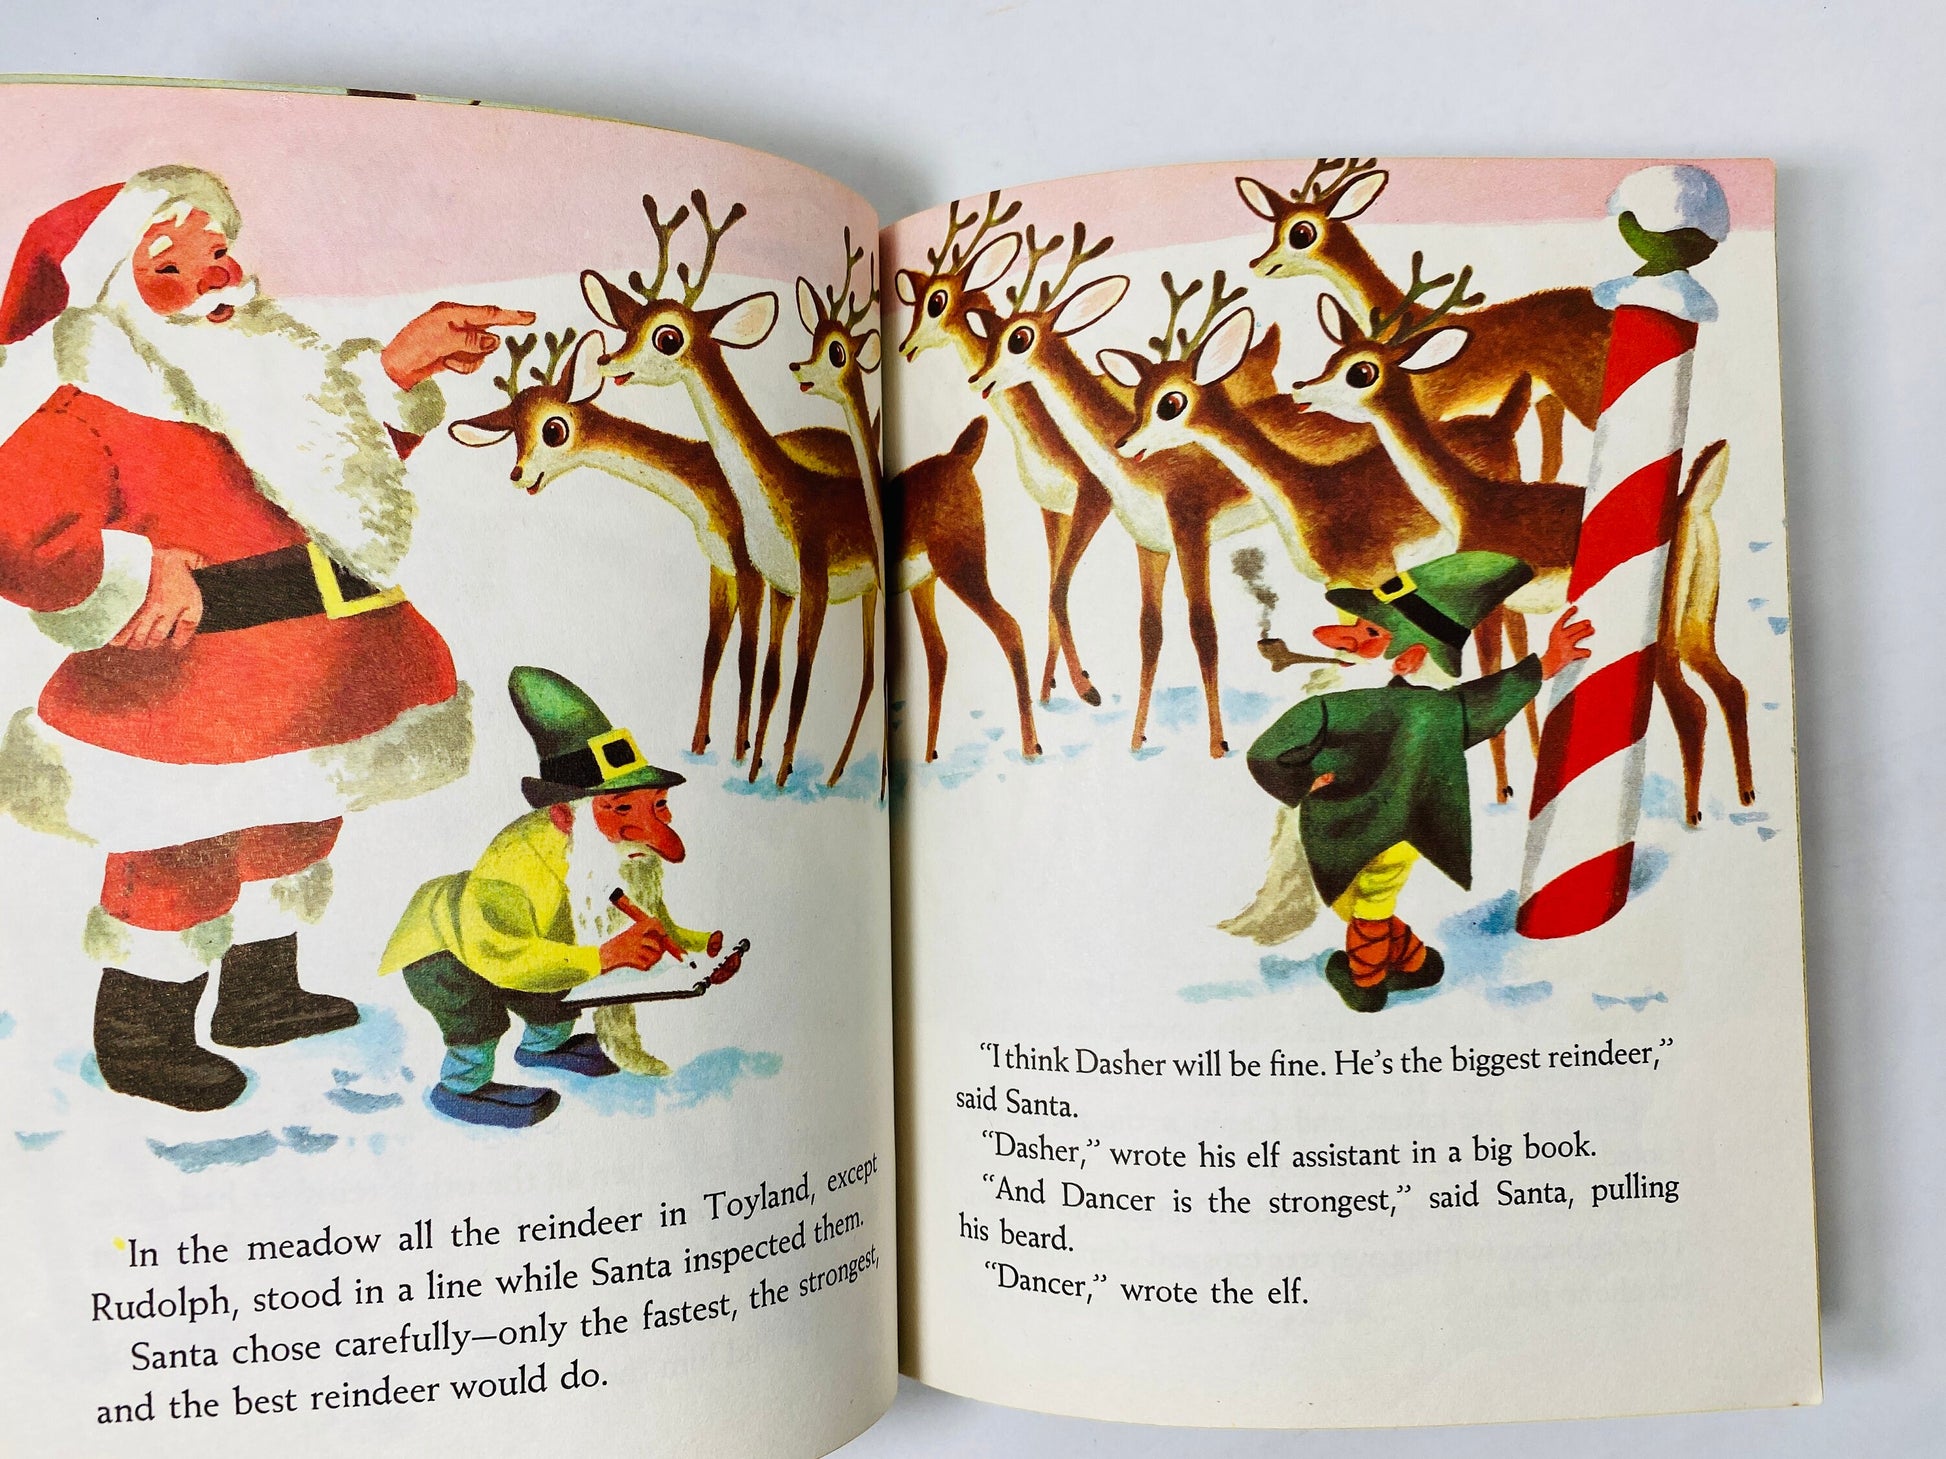 1958 Rudolph the Red-Nosed Reindeer vintage Little Golden Book FIRST PRINTING Barbara Shook Hazen Illustrated by Richard Scarry